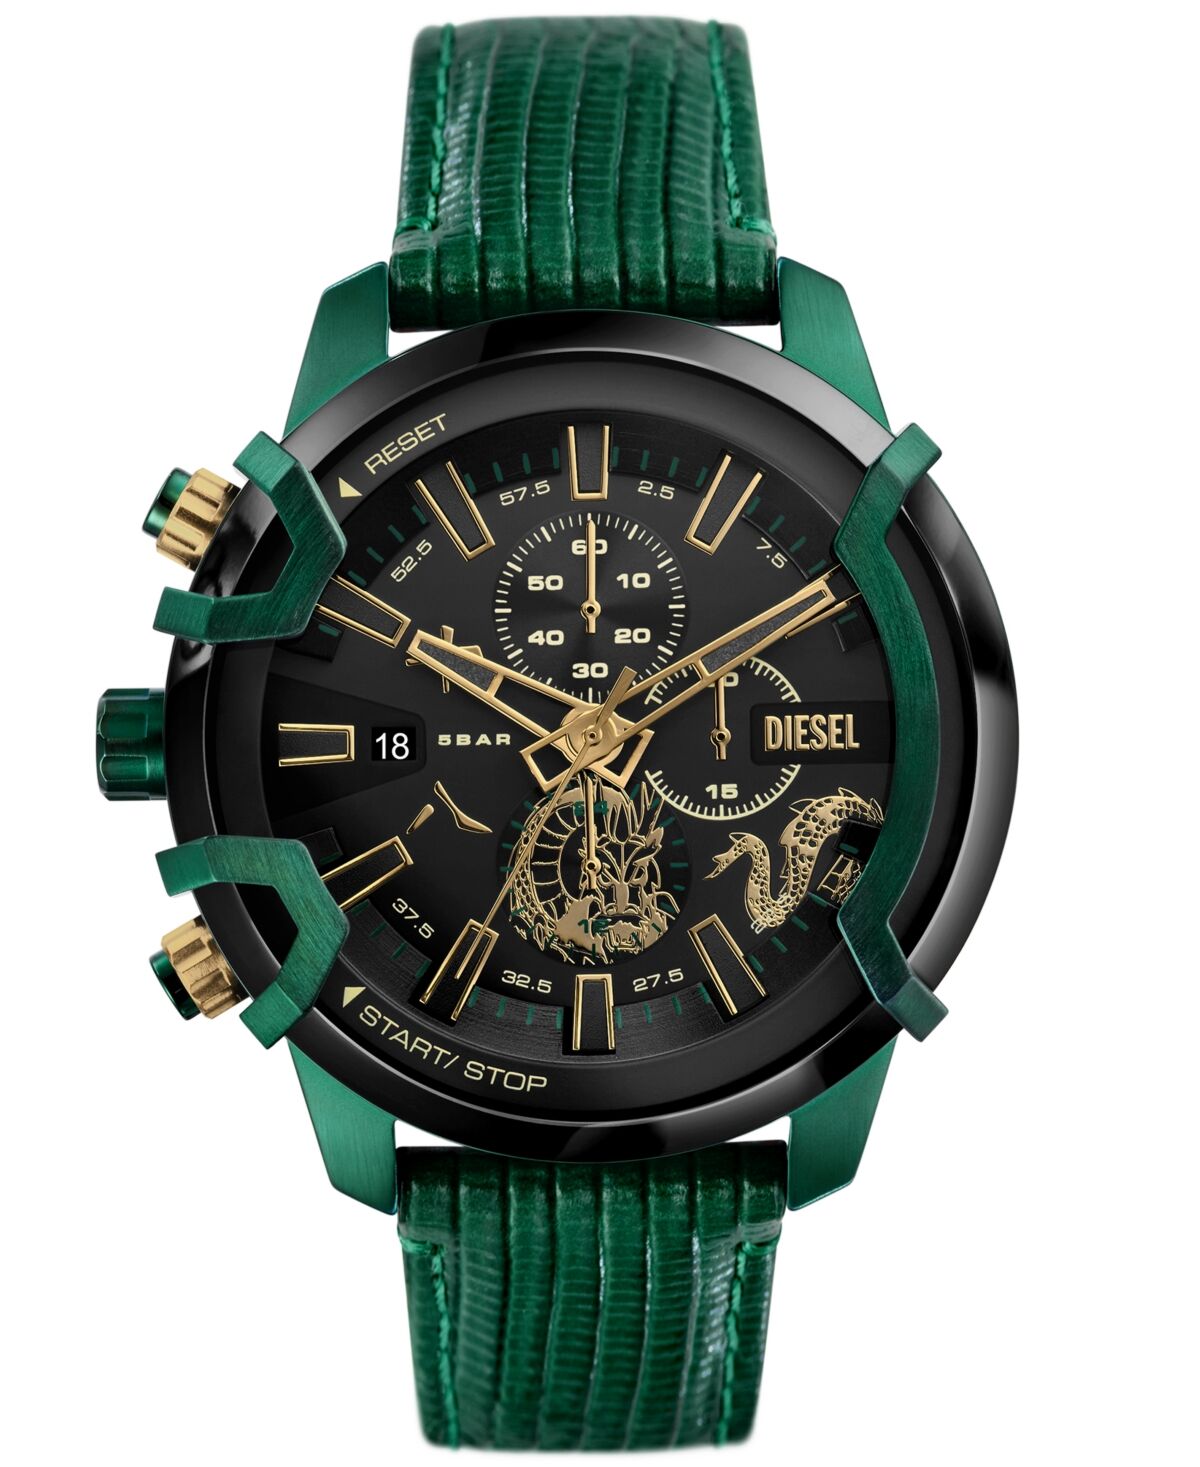 Diesel Men's Griffed Chronograph Green Leather Watch 48mm - Green